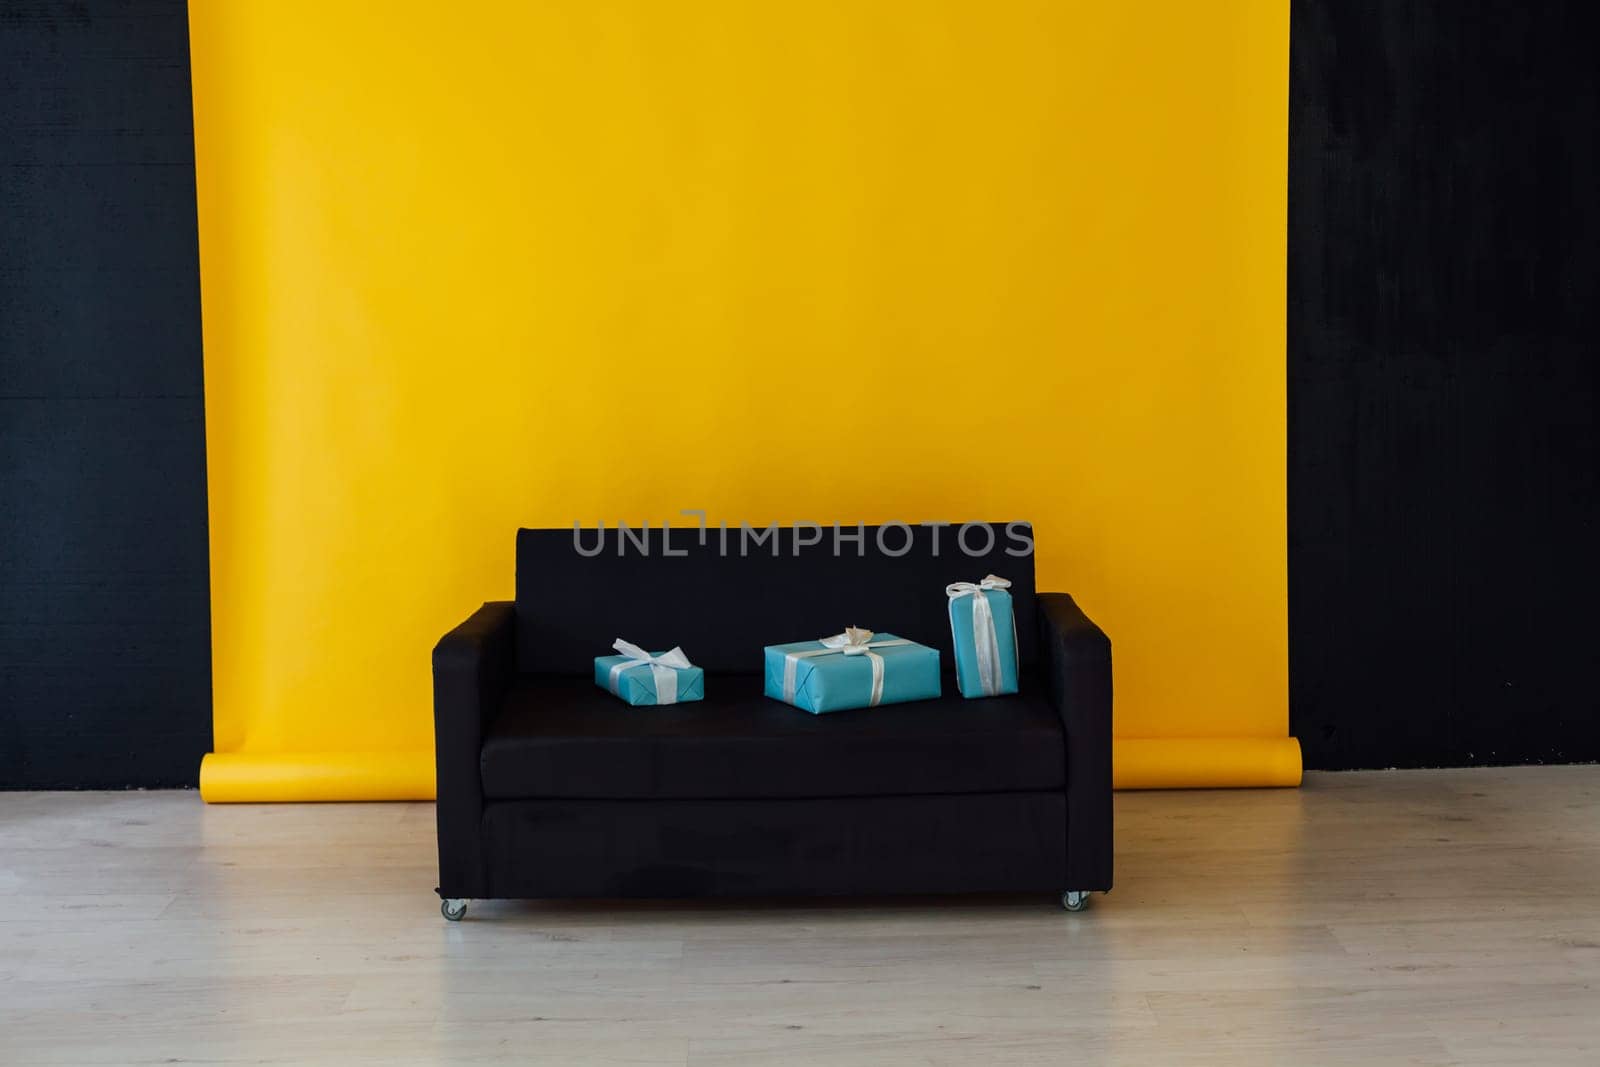 black sofa with gifts in the interior of the yellow room by Simakov